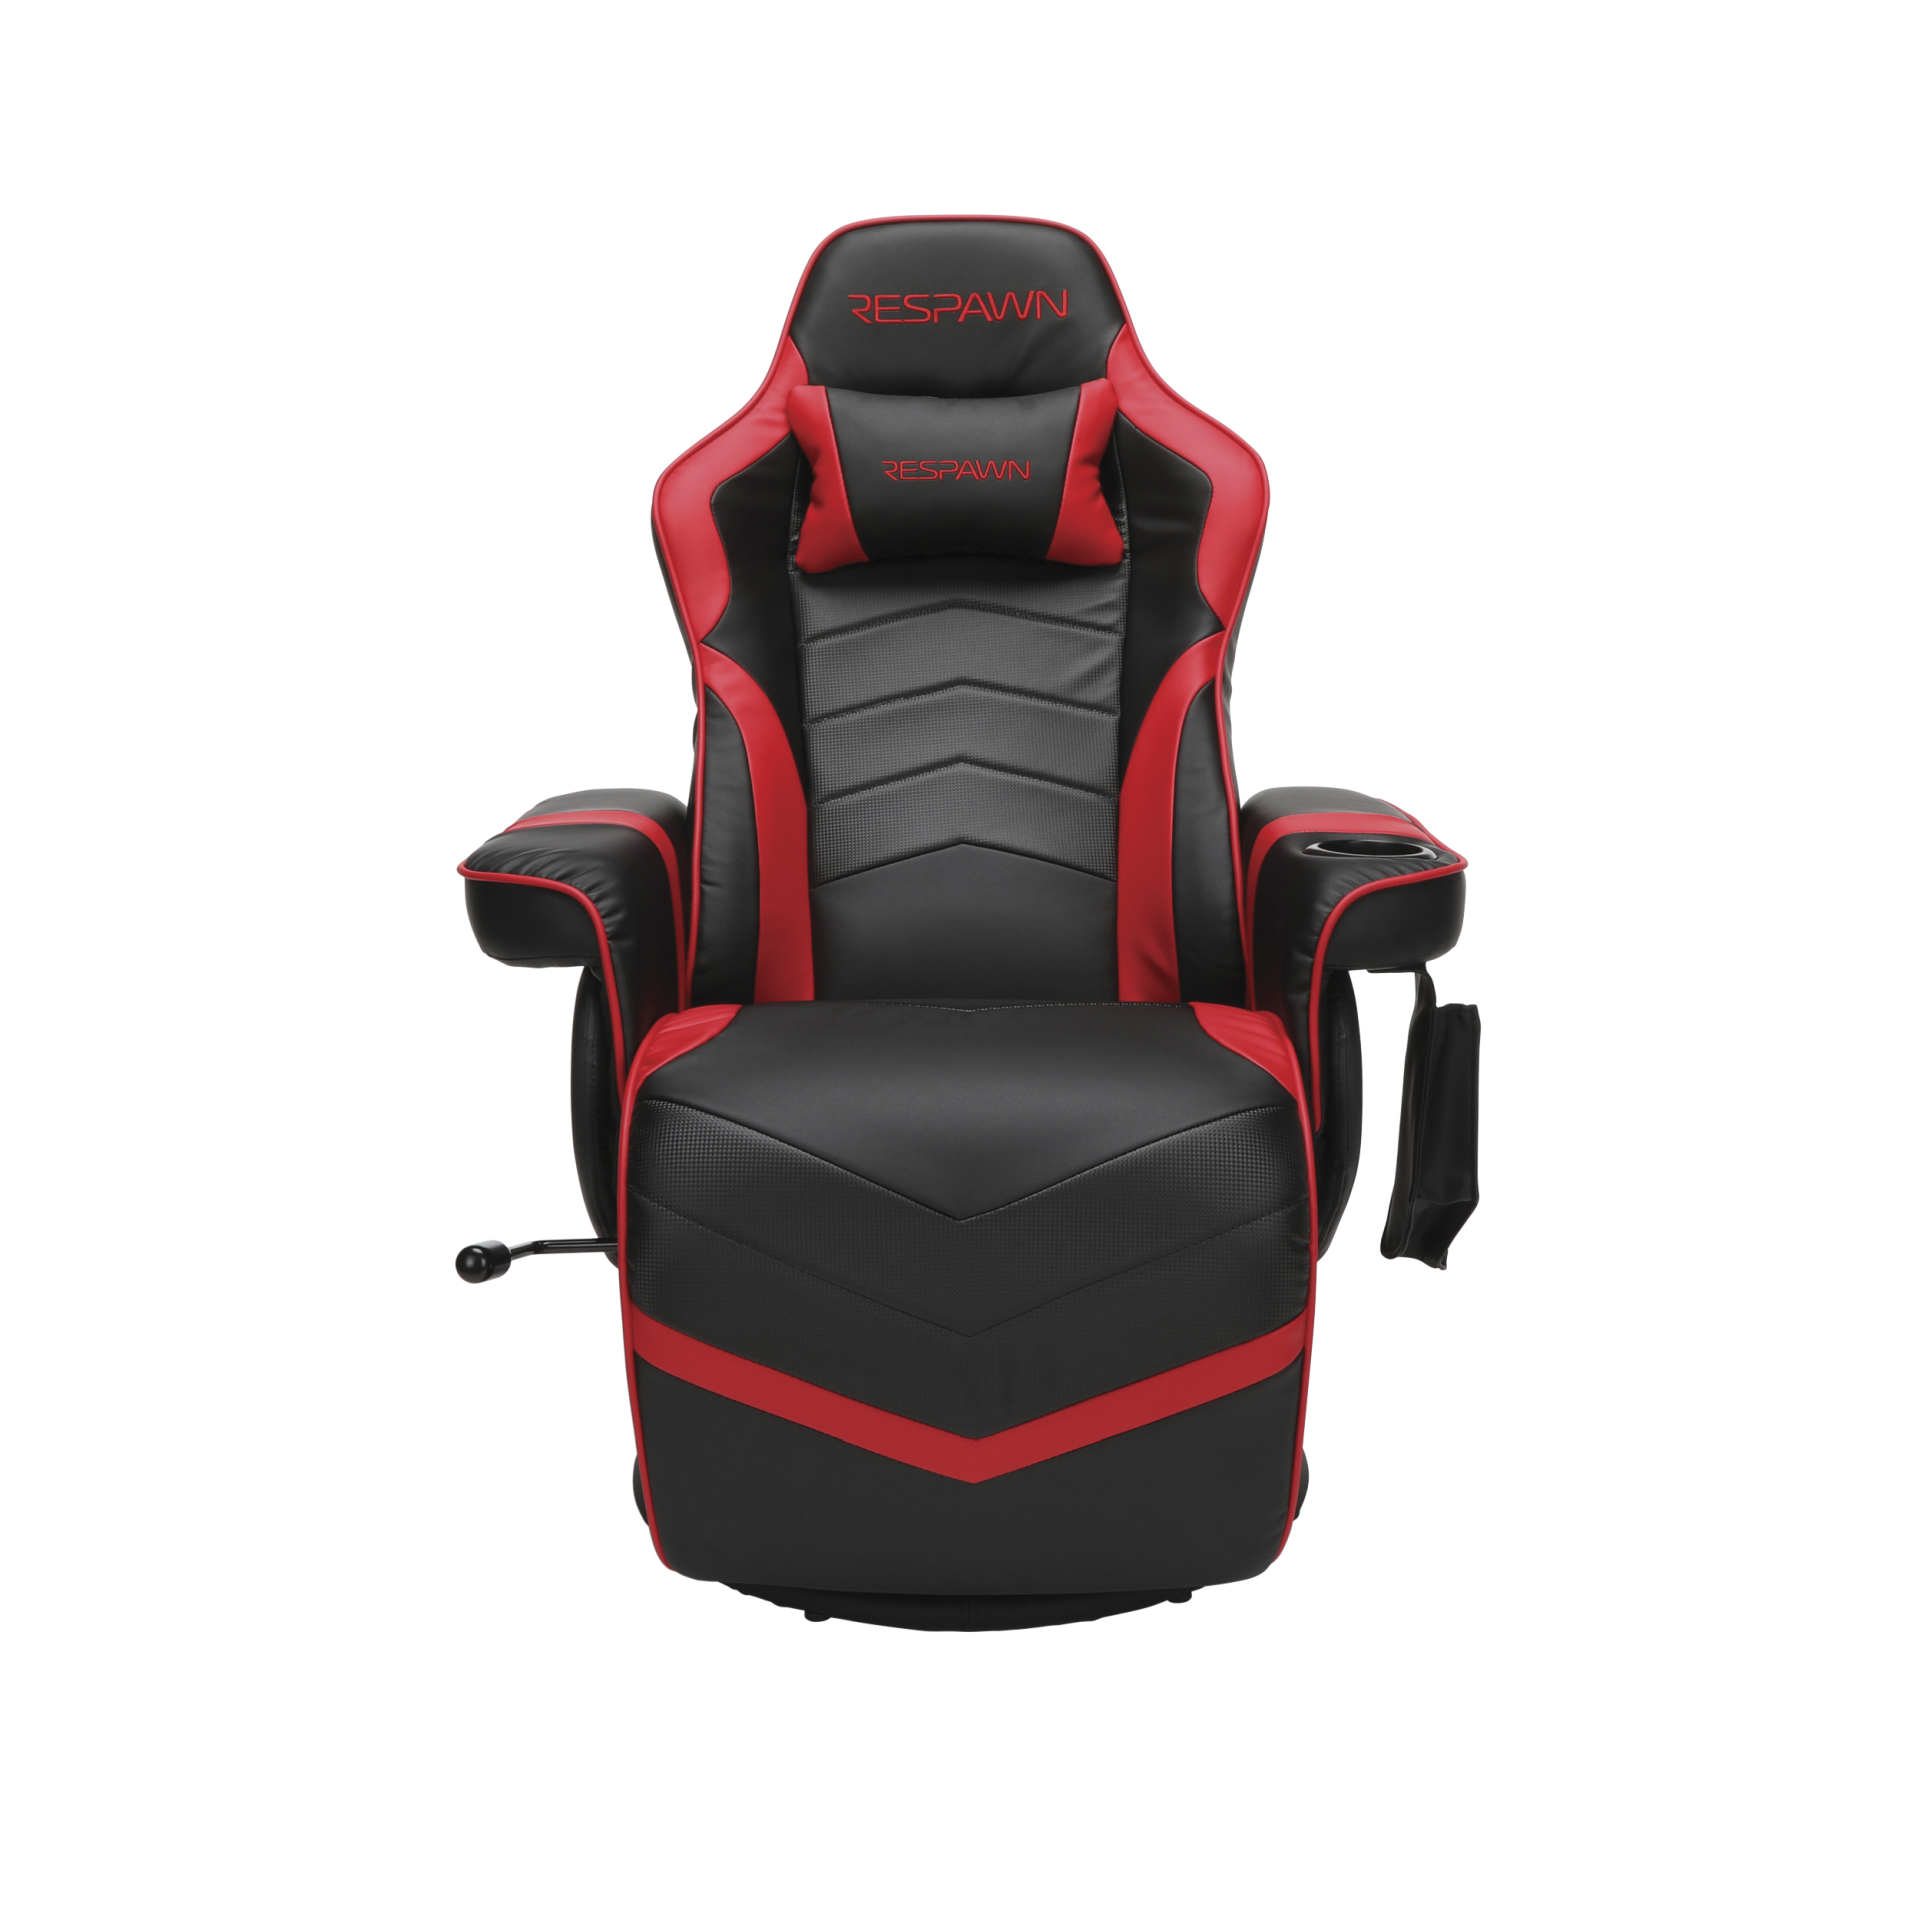 RESPAWN RSP-900 Gaming Recliner #26